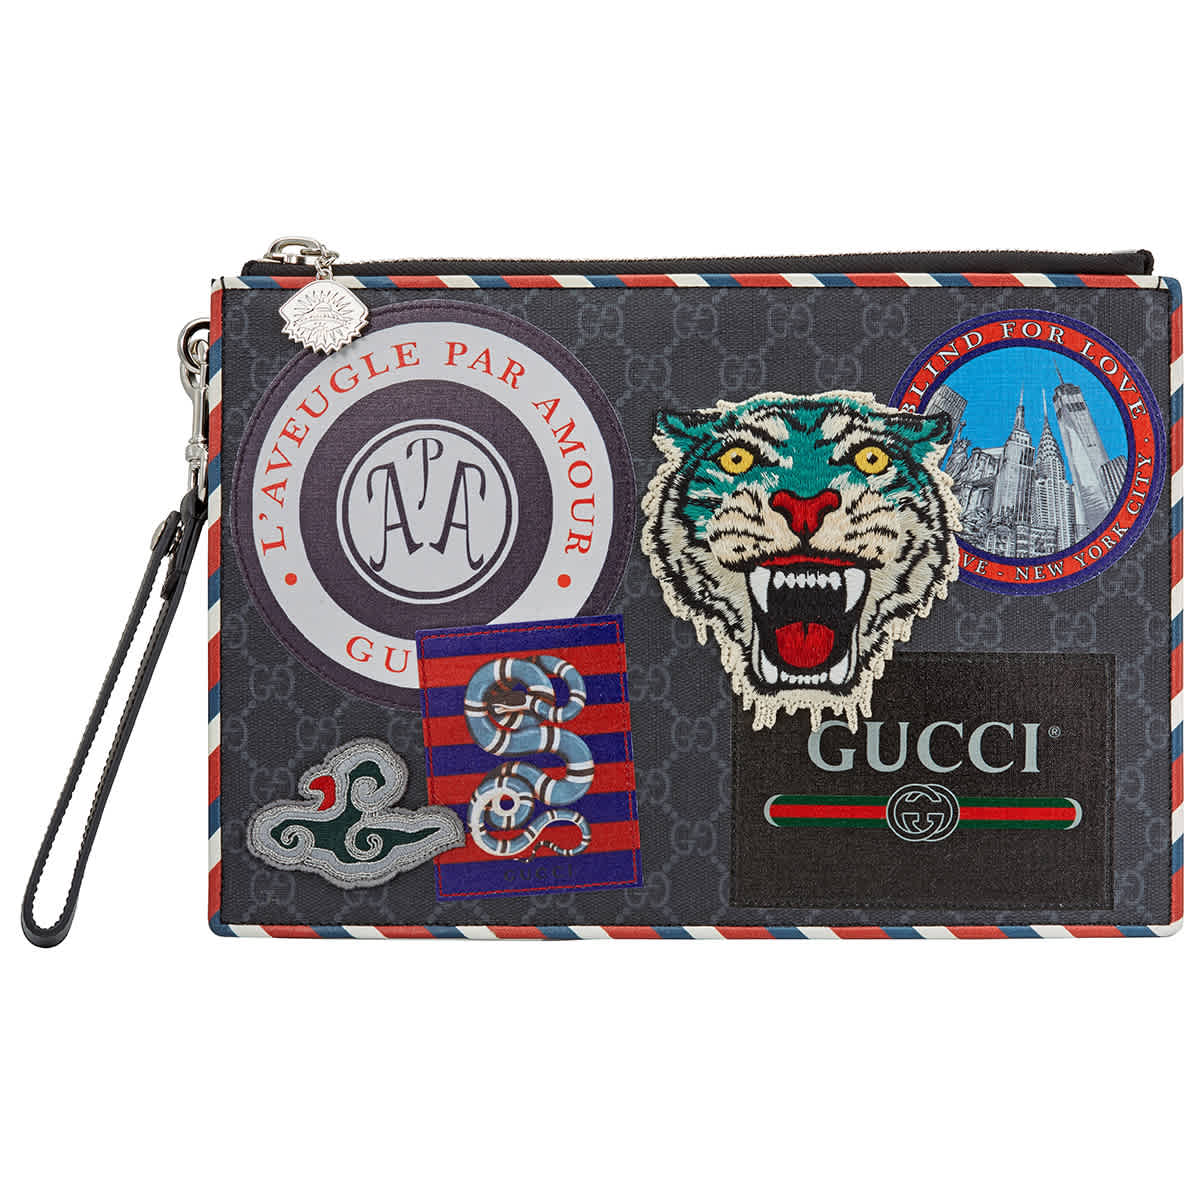 Gucci Mens Night Courrier Gg Supreme Pouch In Black